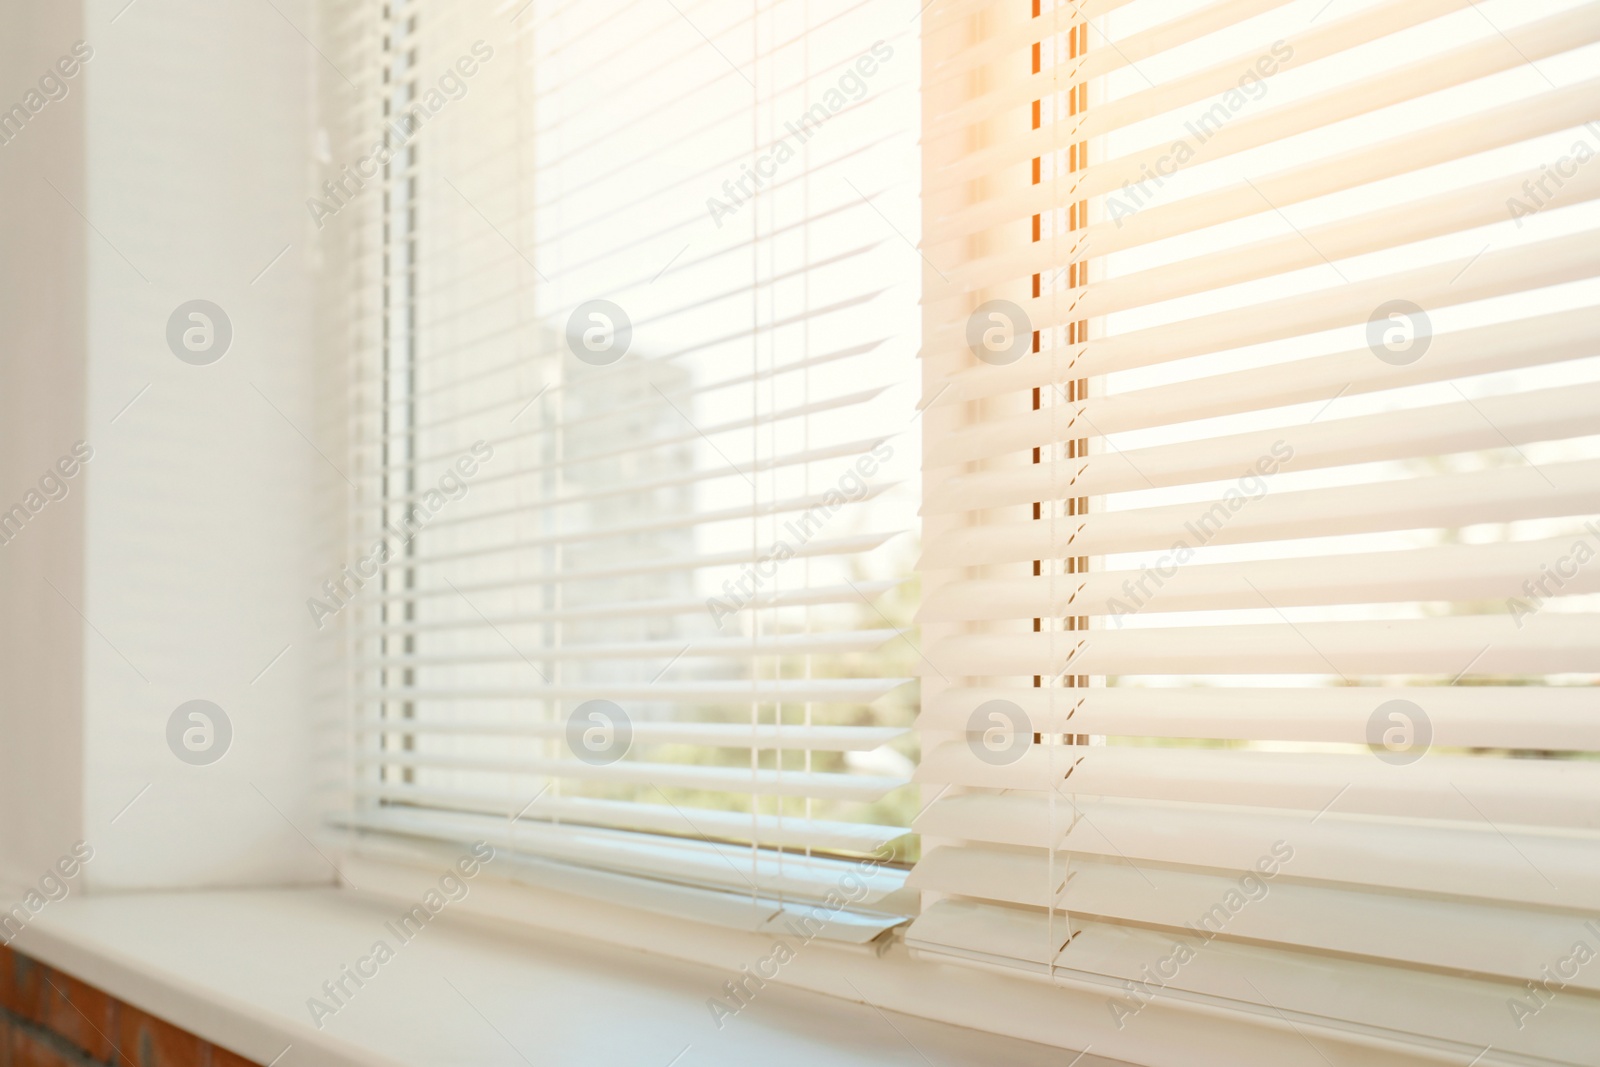 Image of Beautiful view through window with blinds on sunny day, closeup